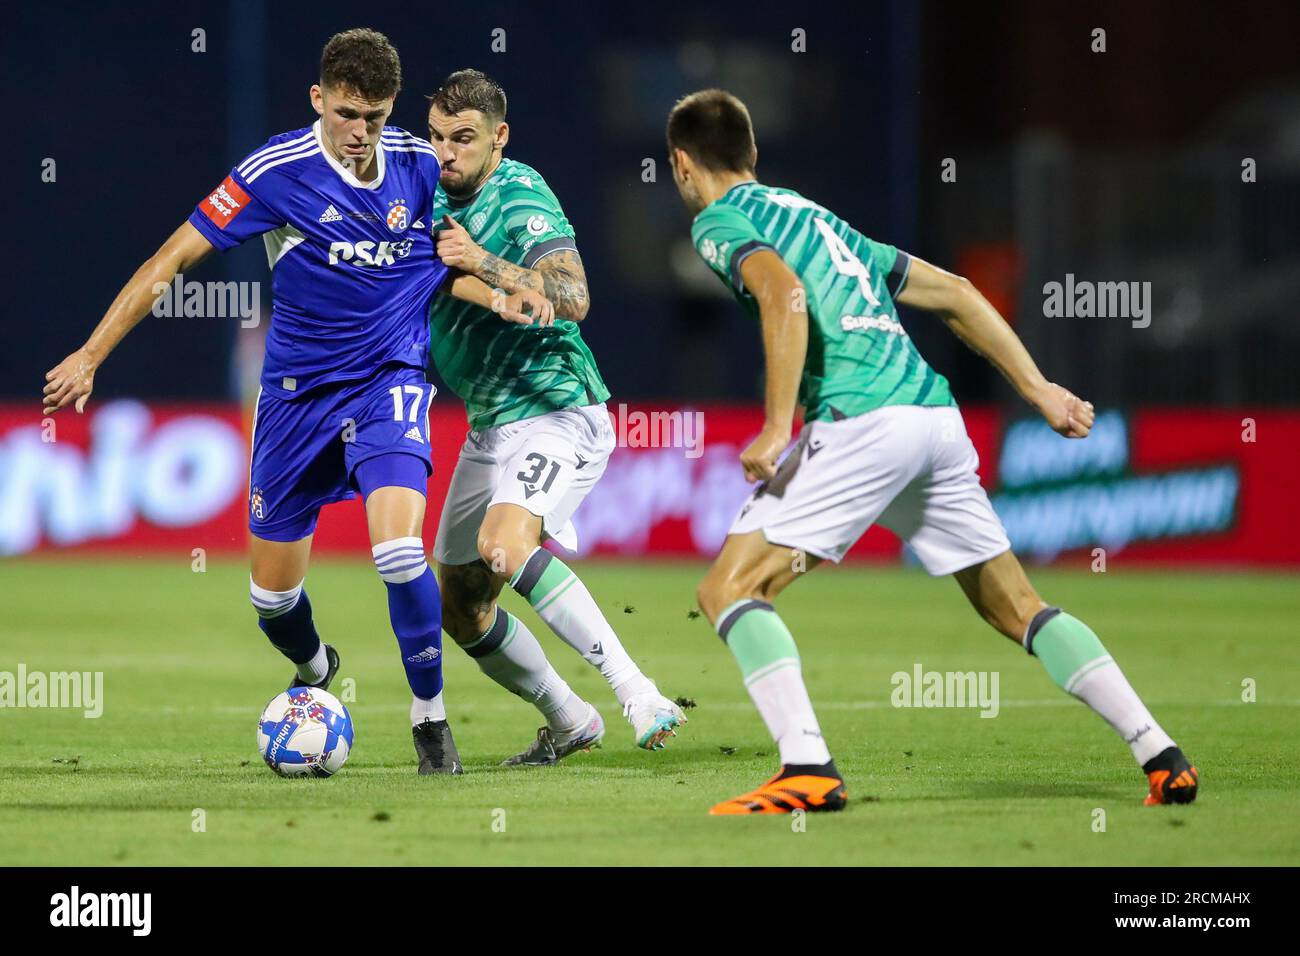 Zagreb, Croatia. 15th July, 2023. Jan Mlakar of Hajduk Split and Fran Topic  of Dinamo Zagreb in action during the Supersport Supercup match between GNK  Dinamo Zagreb and HNK Hajduk Split at Maksimir stadium on July 15, 2023, in  Zagreb, Croatia